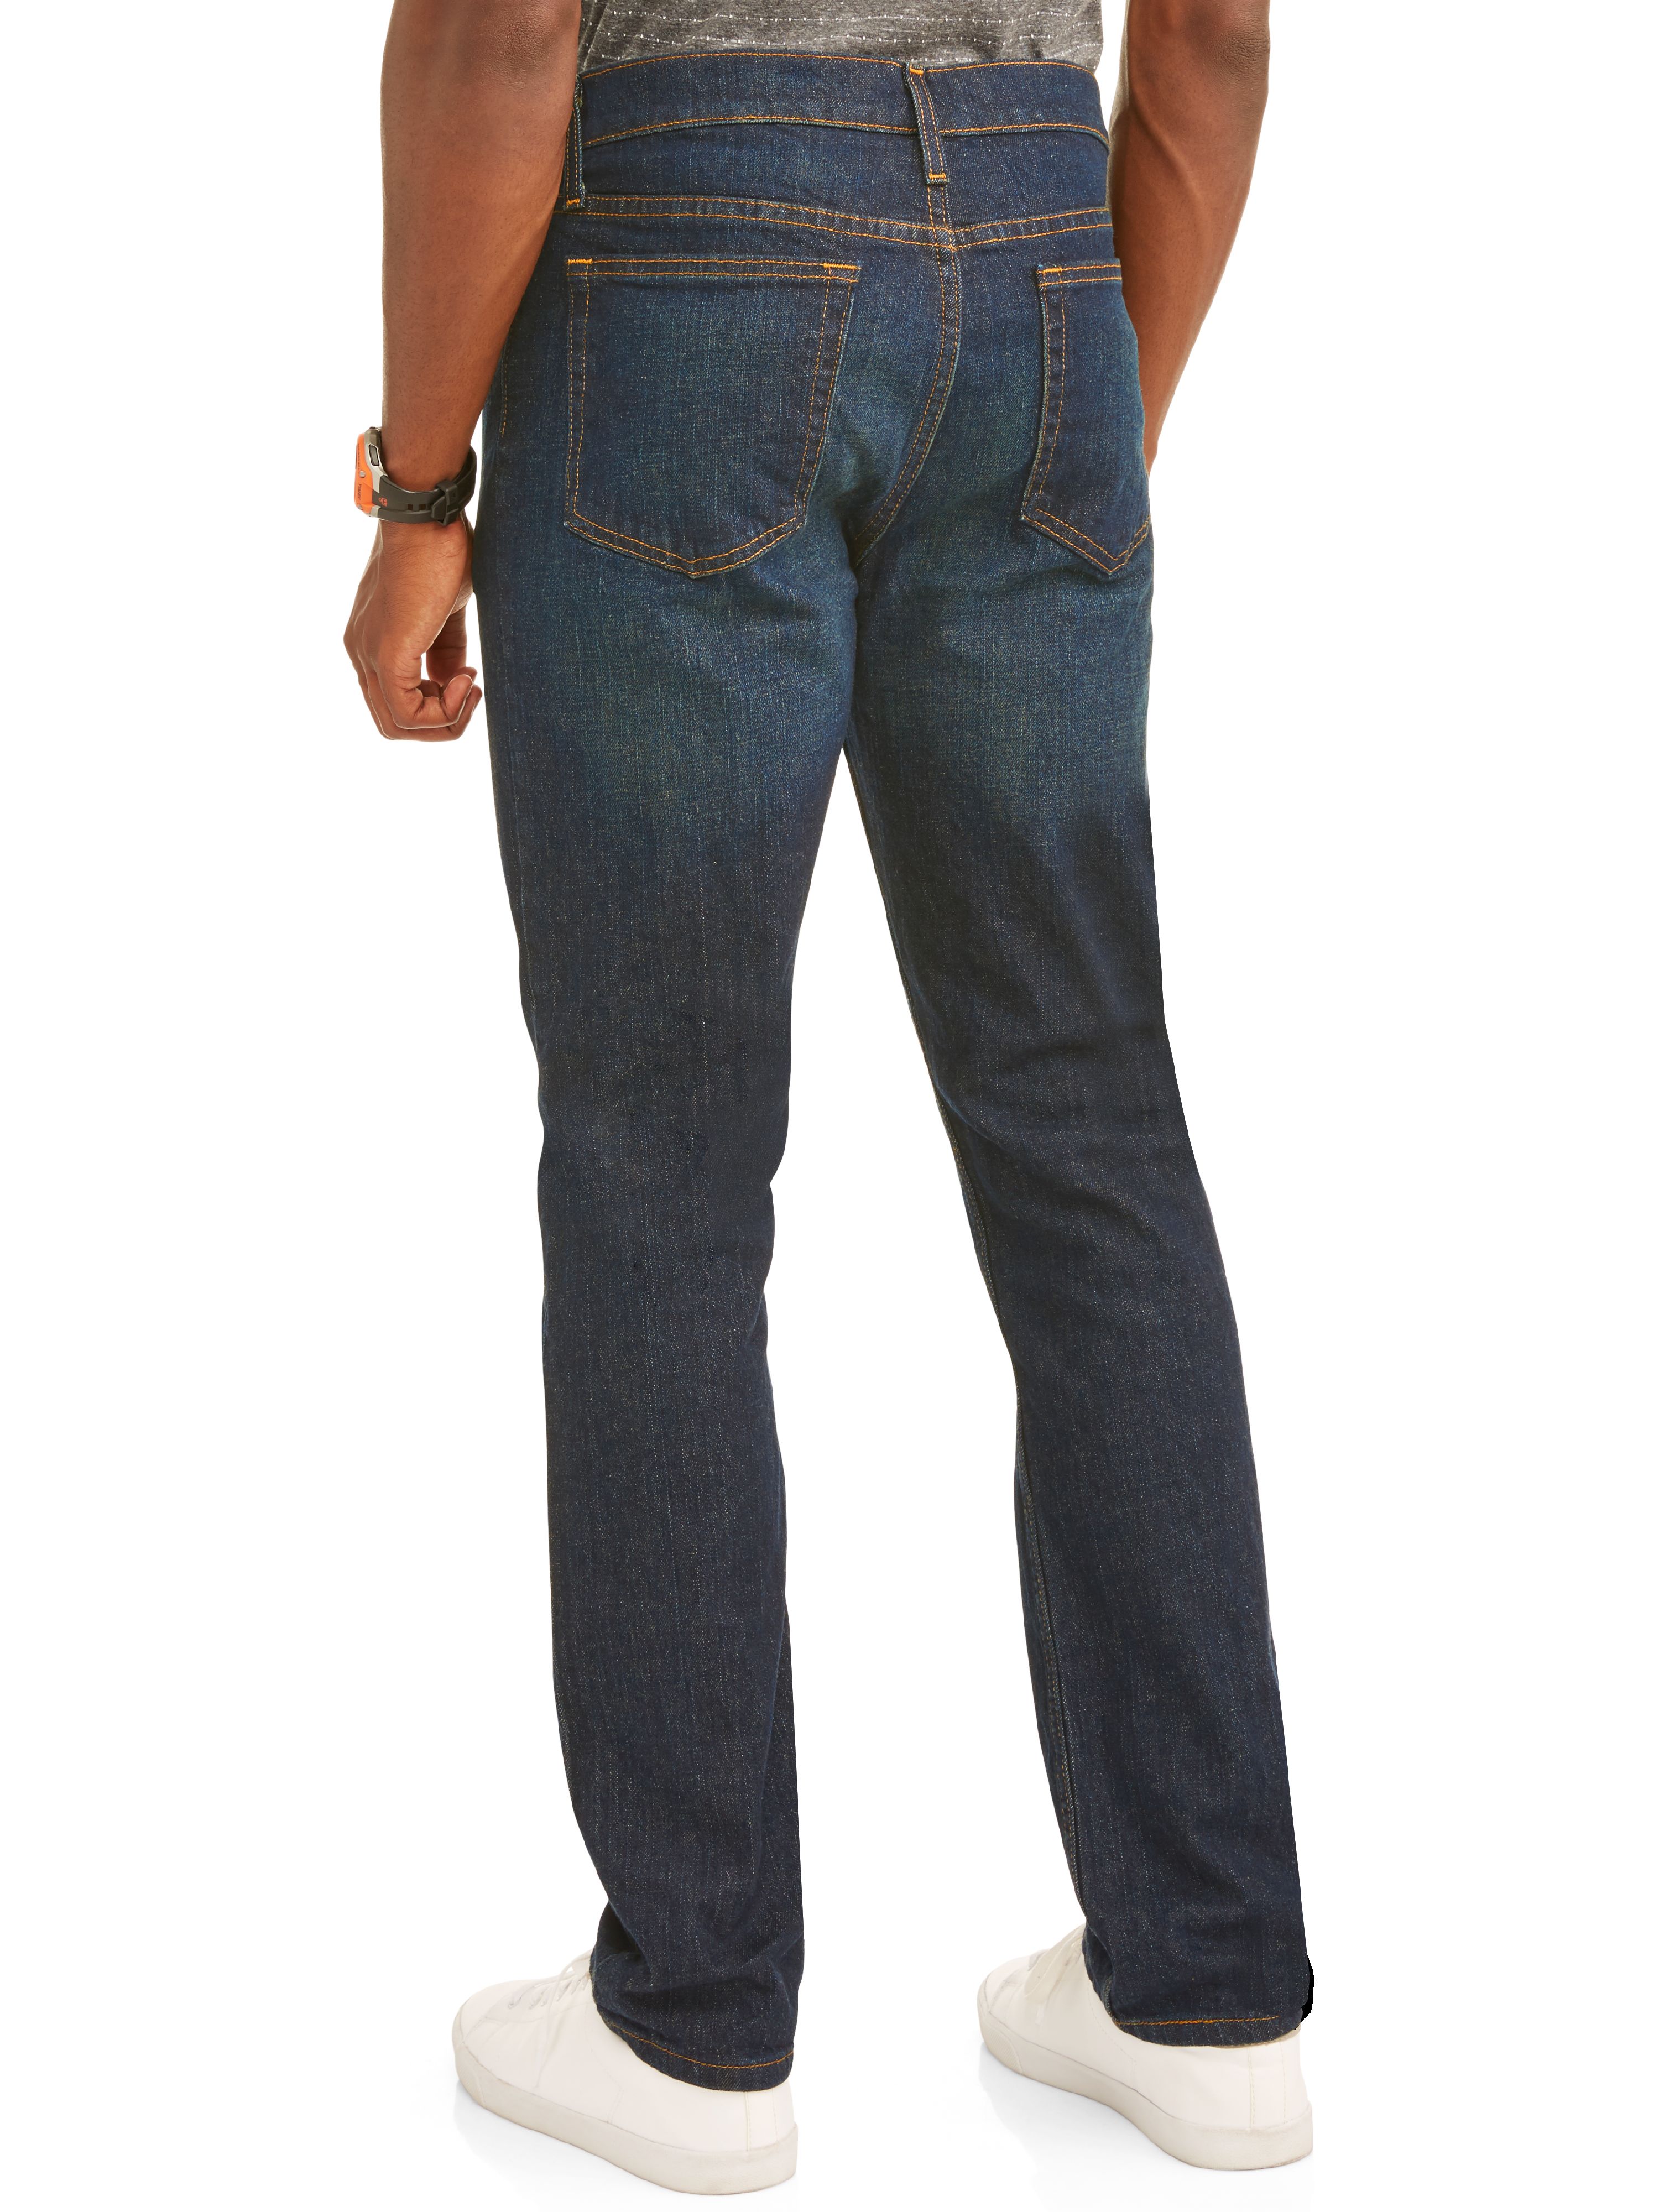 George Men's Straight Fit Jeans - image 3 of 5